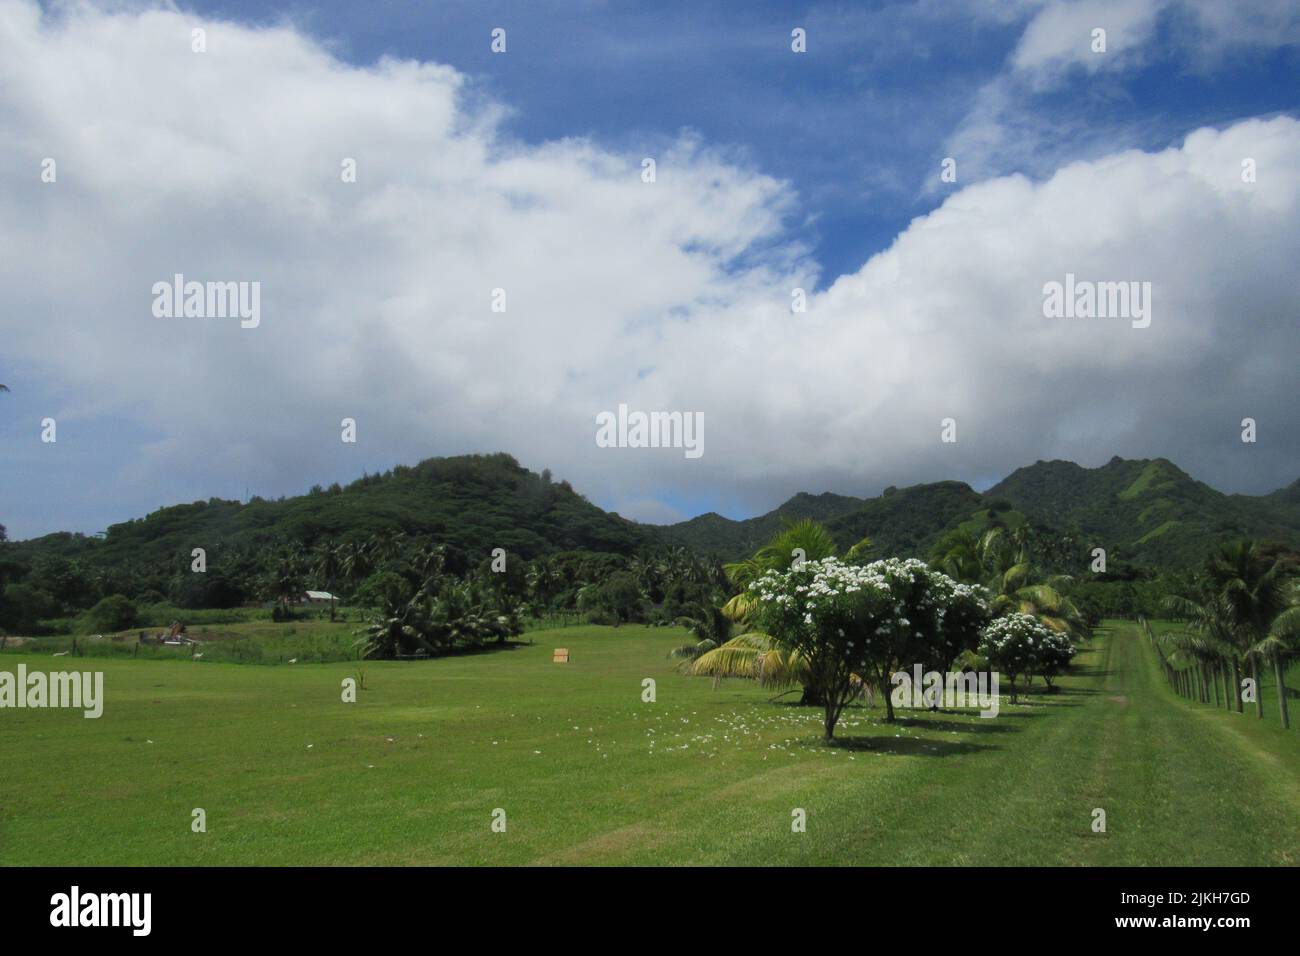 A view of Rarotonga's green tropical mountains rainforests scenery and landscapes Stock Photo